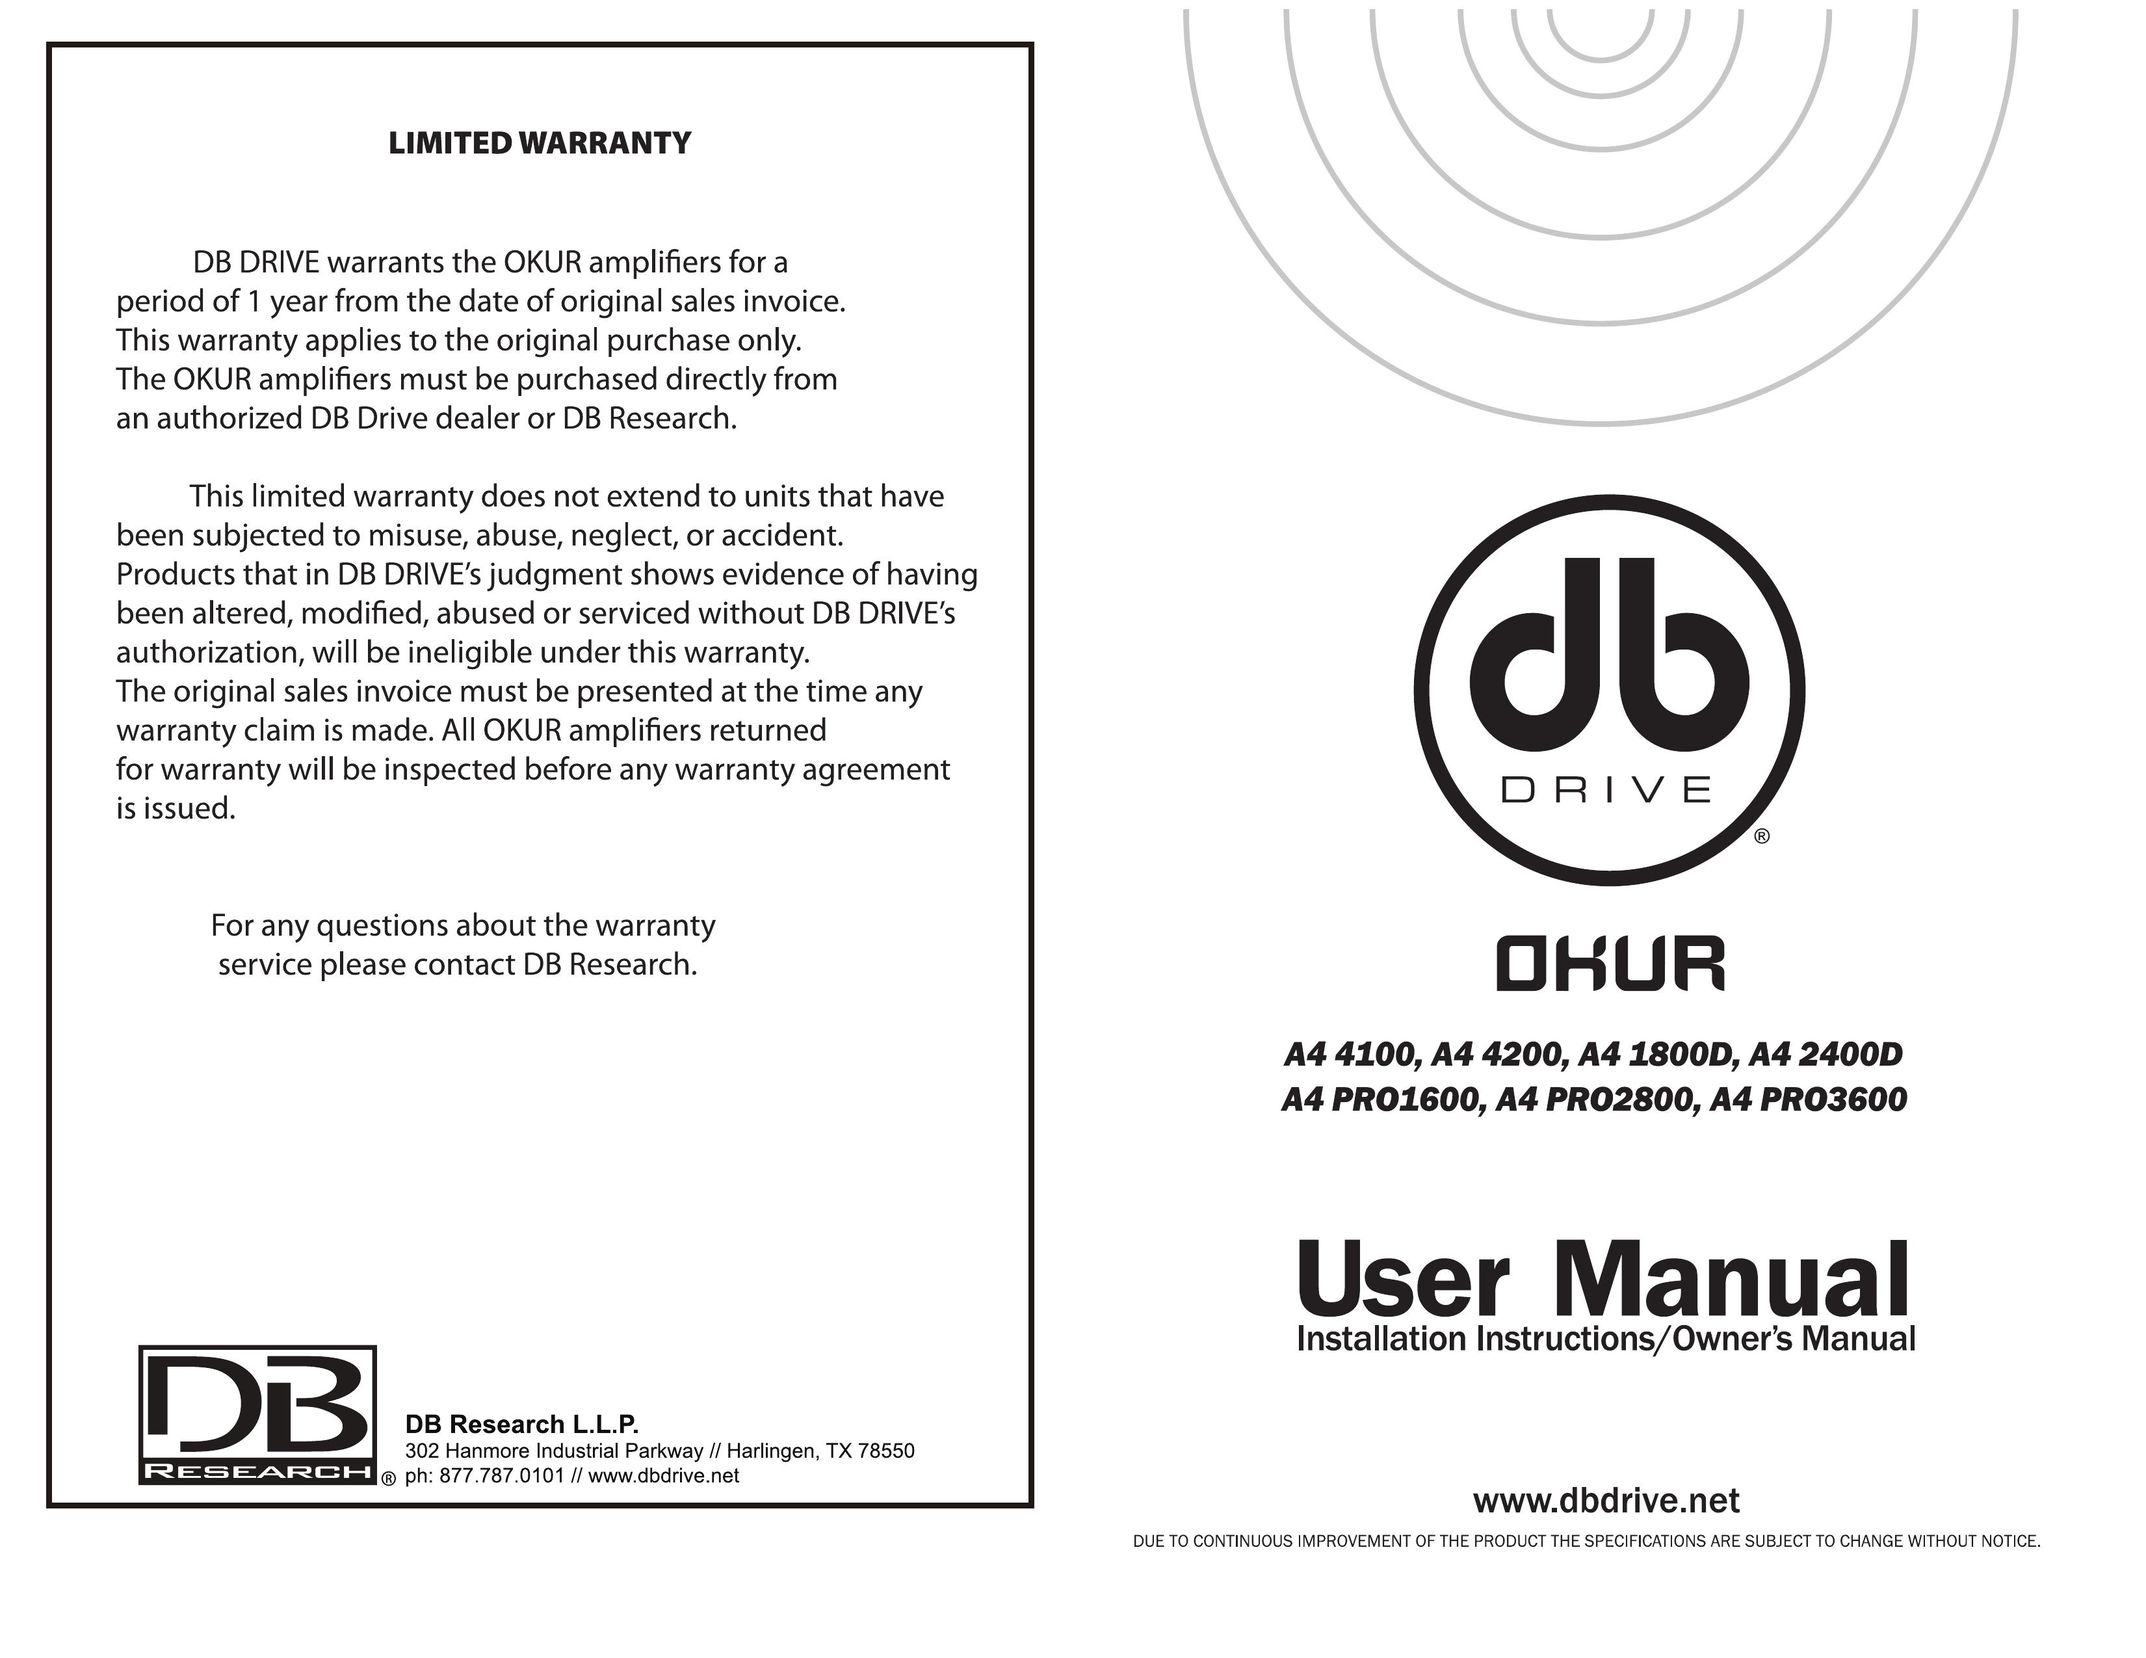 DB Industries A4 PRO2500 Stereo Amplifier User Manual